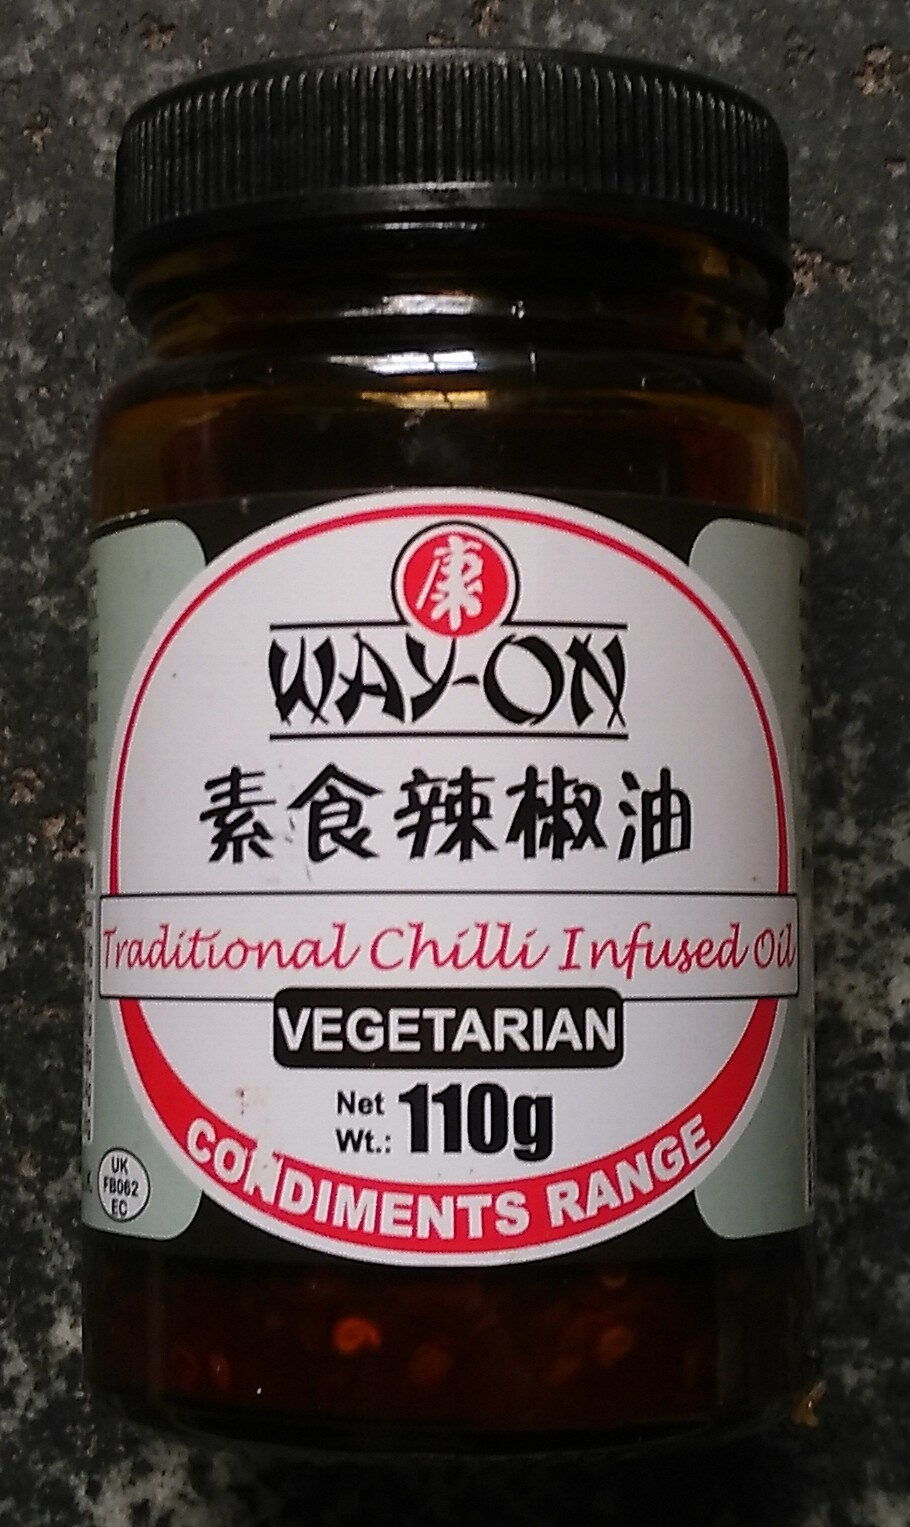 Way-on Traditional Chilli Infused Oil - Product